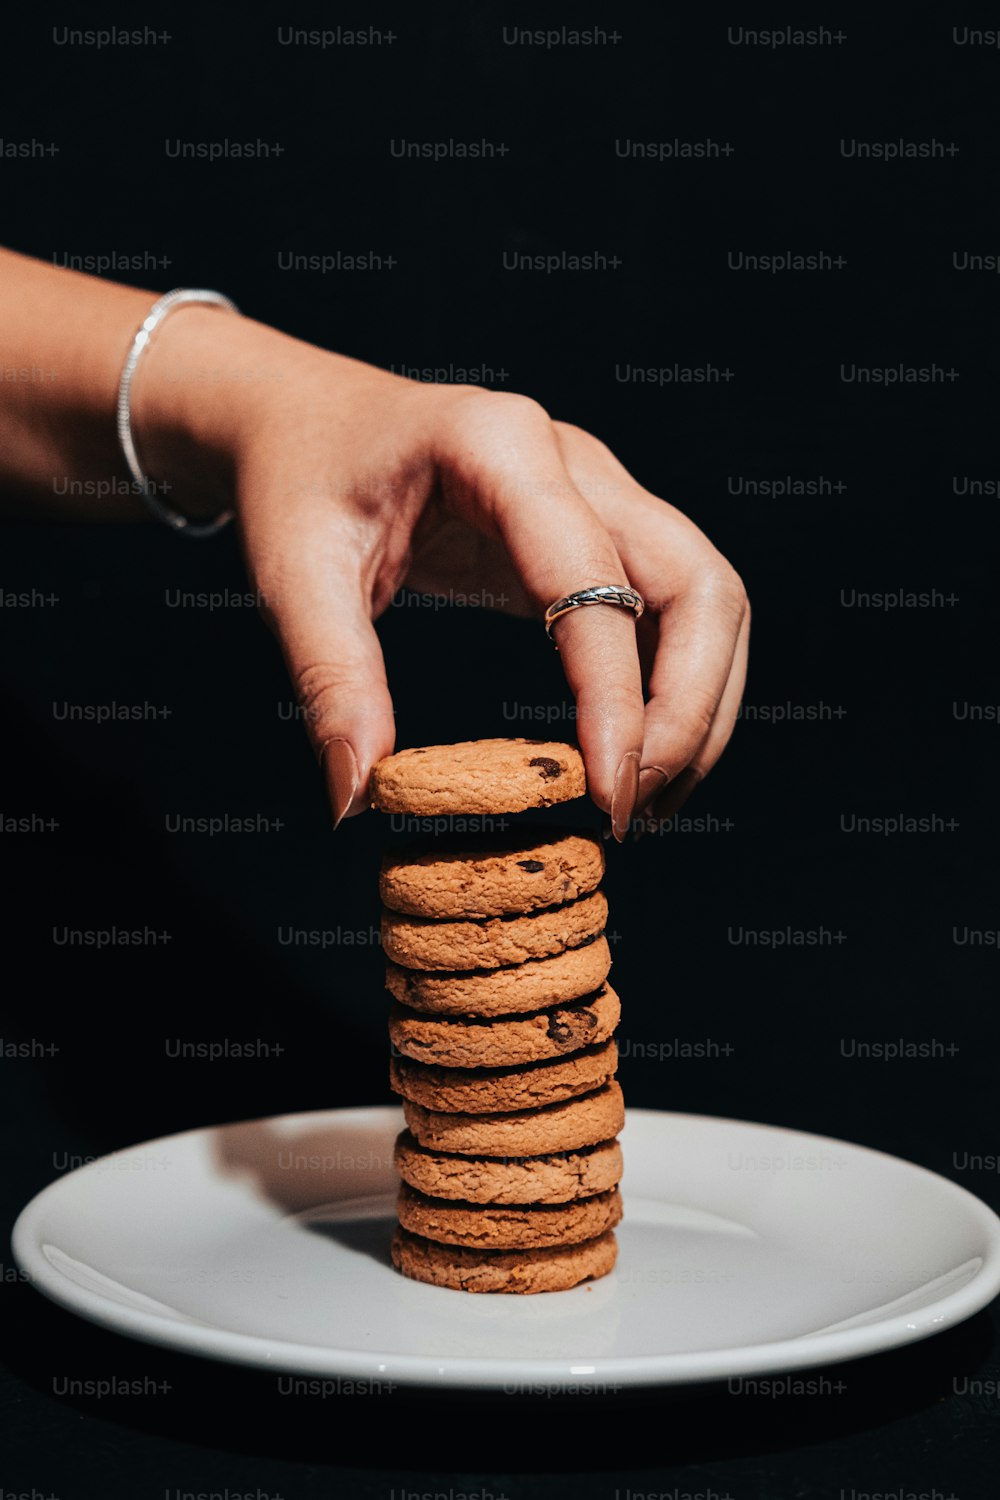 a hand reaching for a stack of cookies on a plate